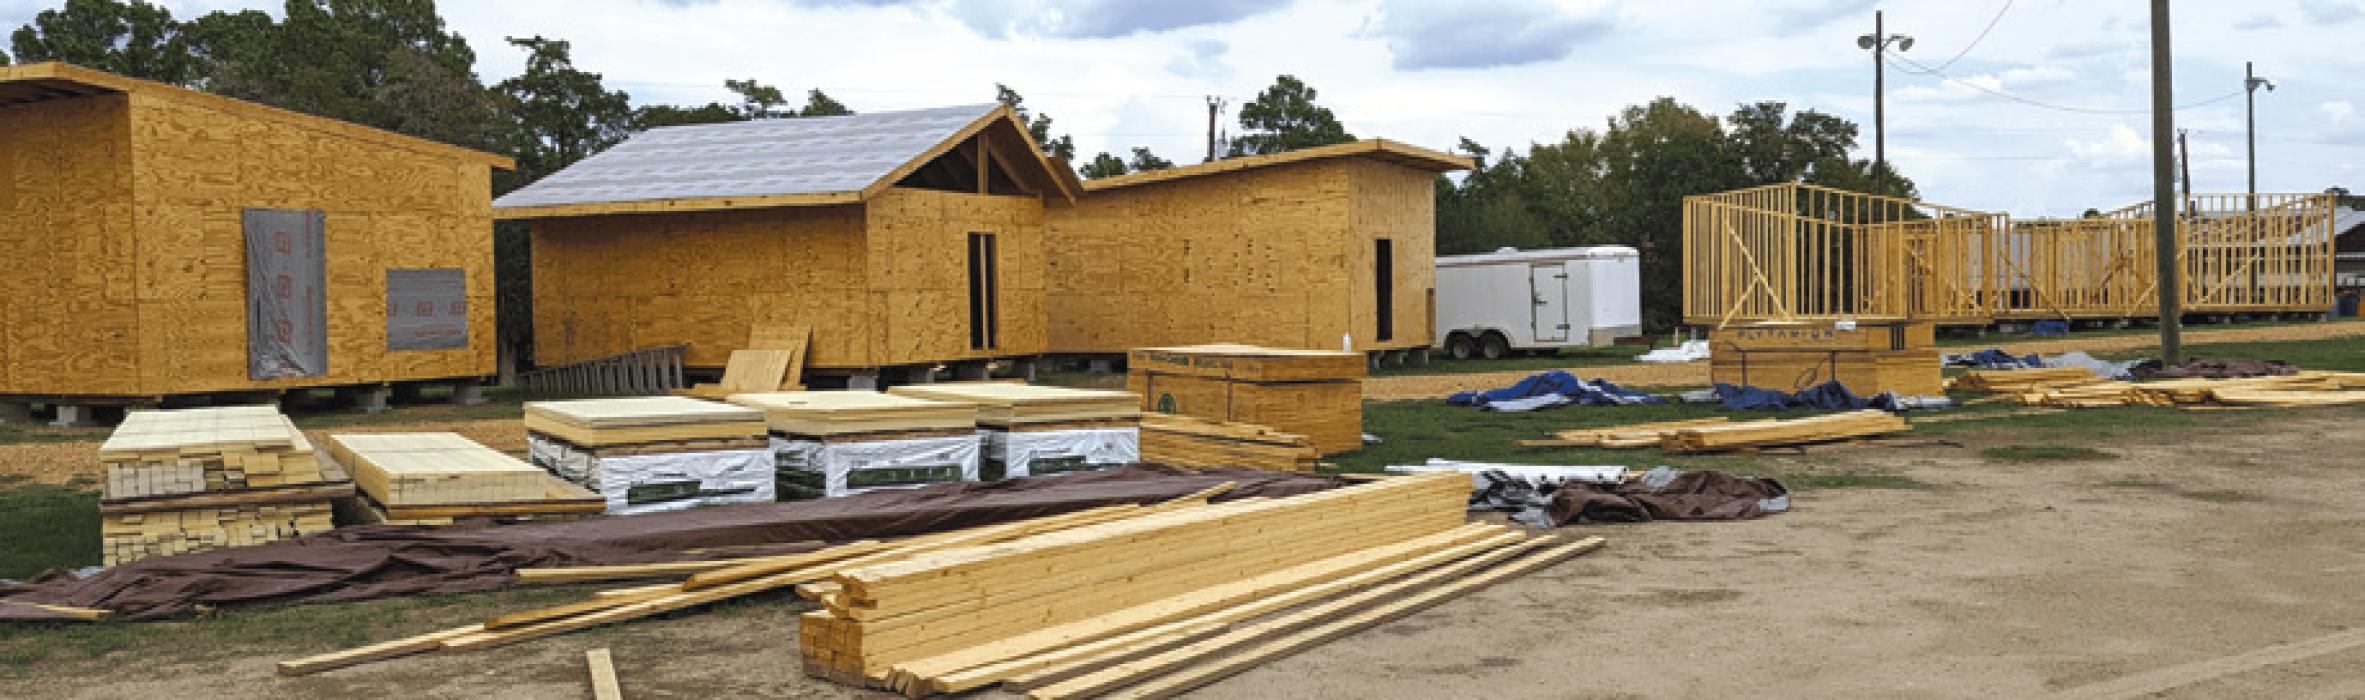 Tejas Camp and Retreat Center is building six new cabins that will accommodate up to 60 more summer campers.